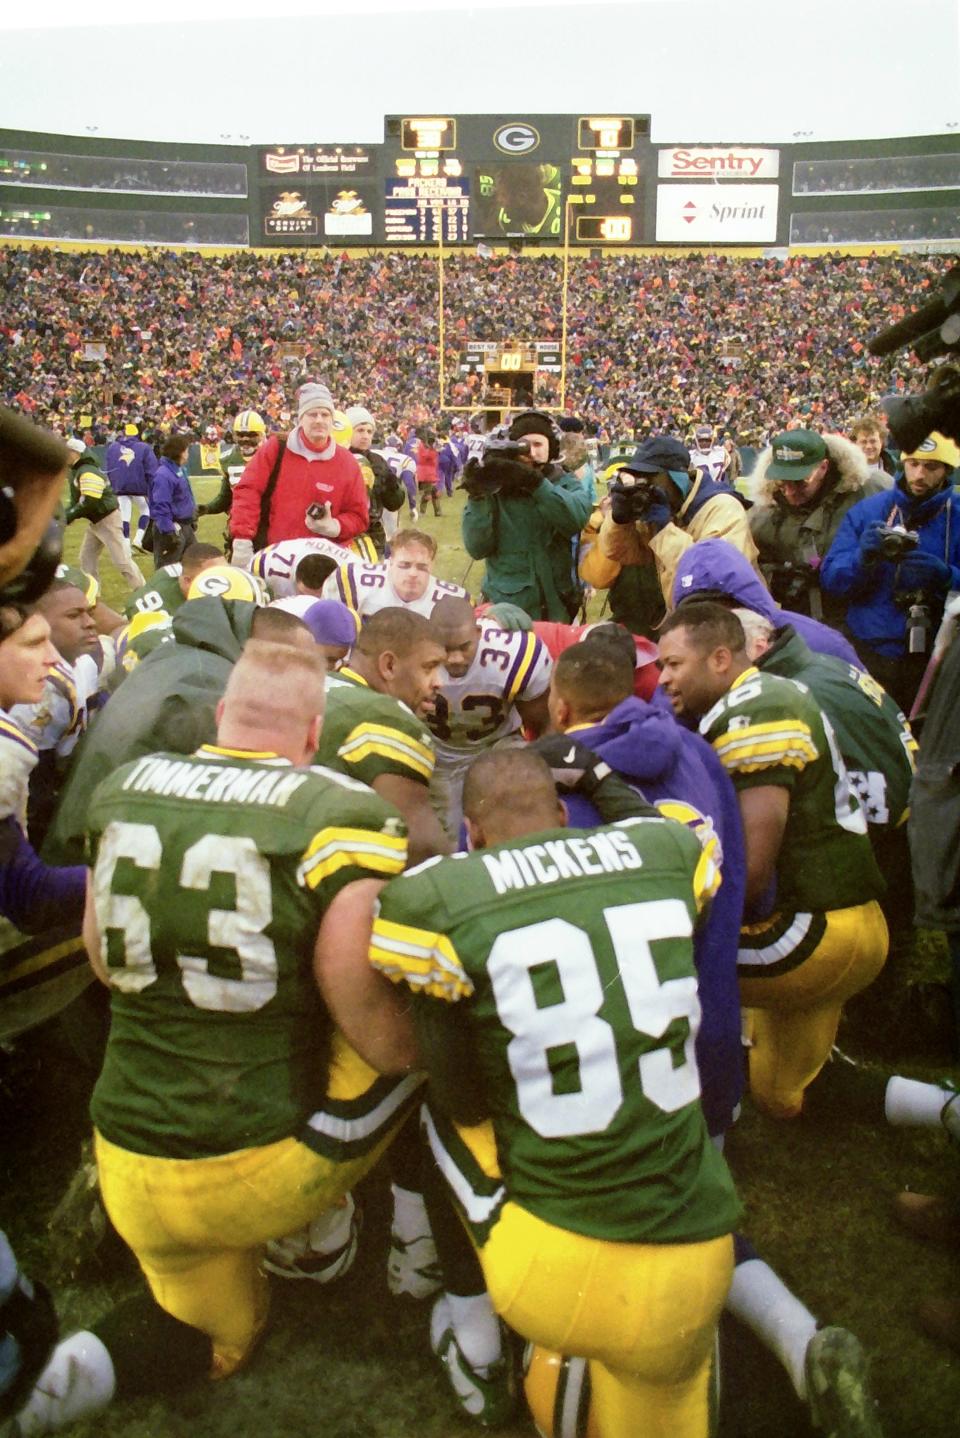 Green Bay Packers defensive end Reggie White (92) leads Minnesota Vikings and Packers players in prayer after the Packers 38-10 victory on Dec. 22, 1996, at Lambeau Field in Green Bay, Wis.